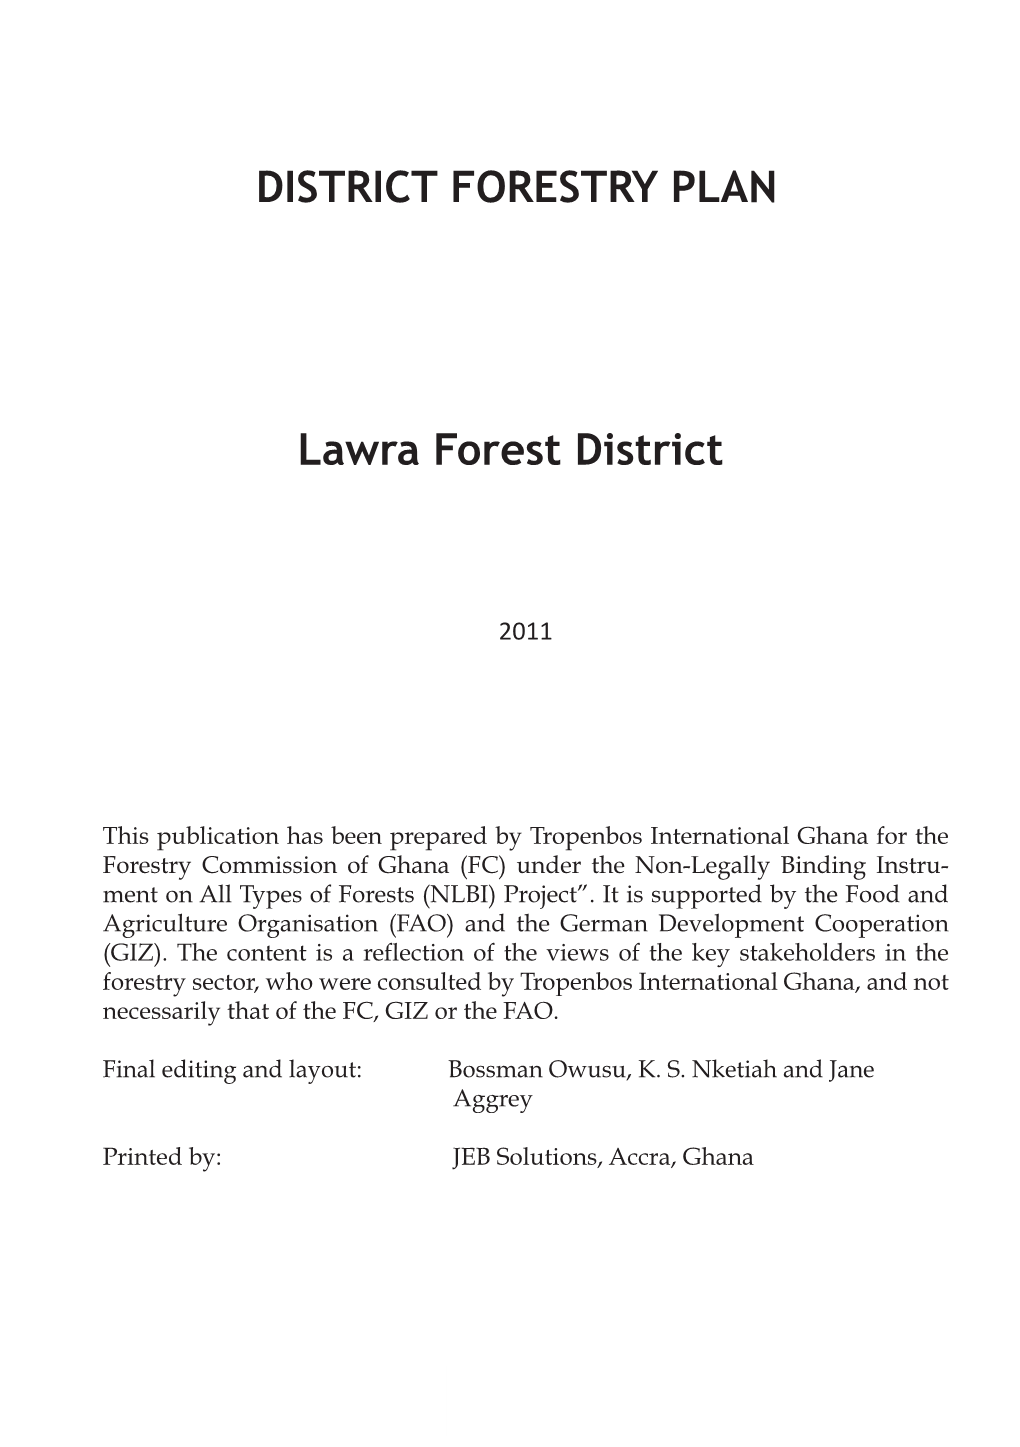 DISTRICT FORESTRY PLAN Lawra Forest District